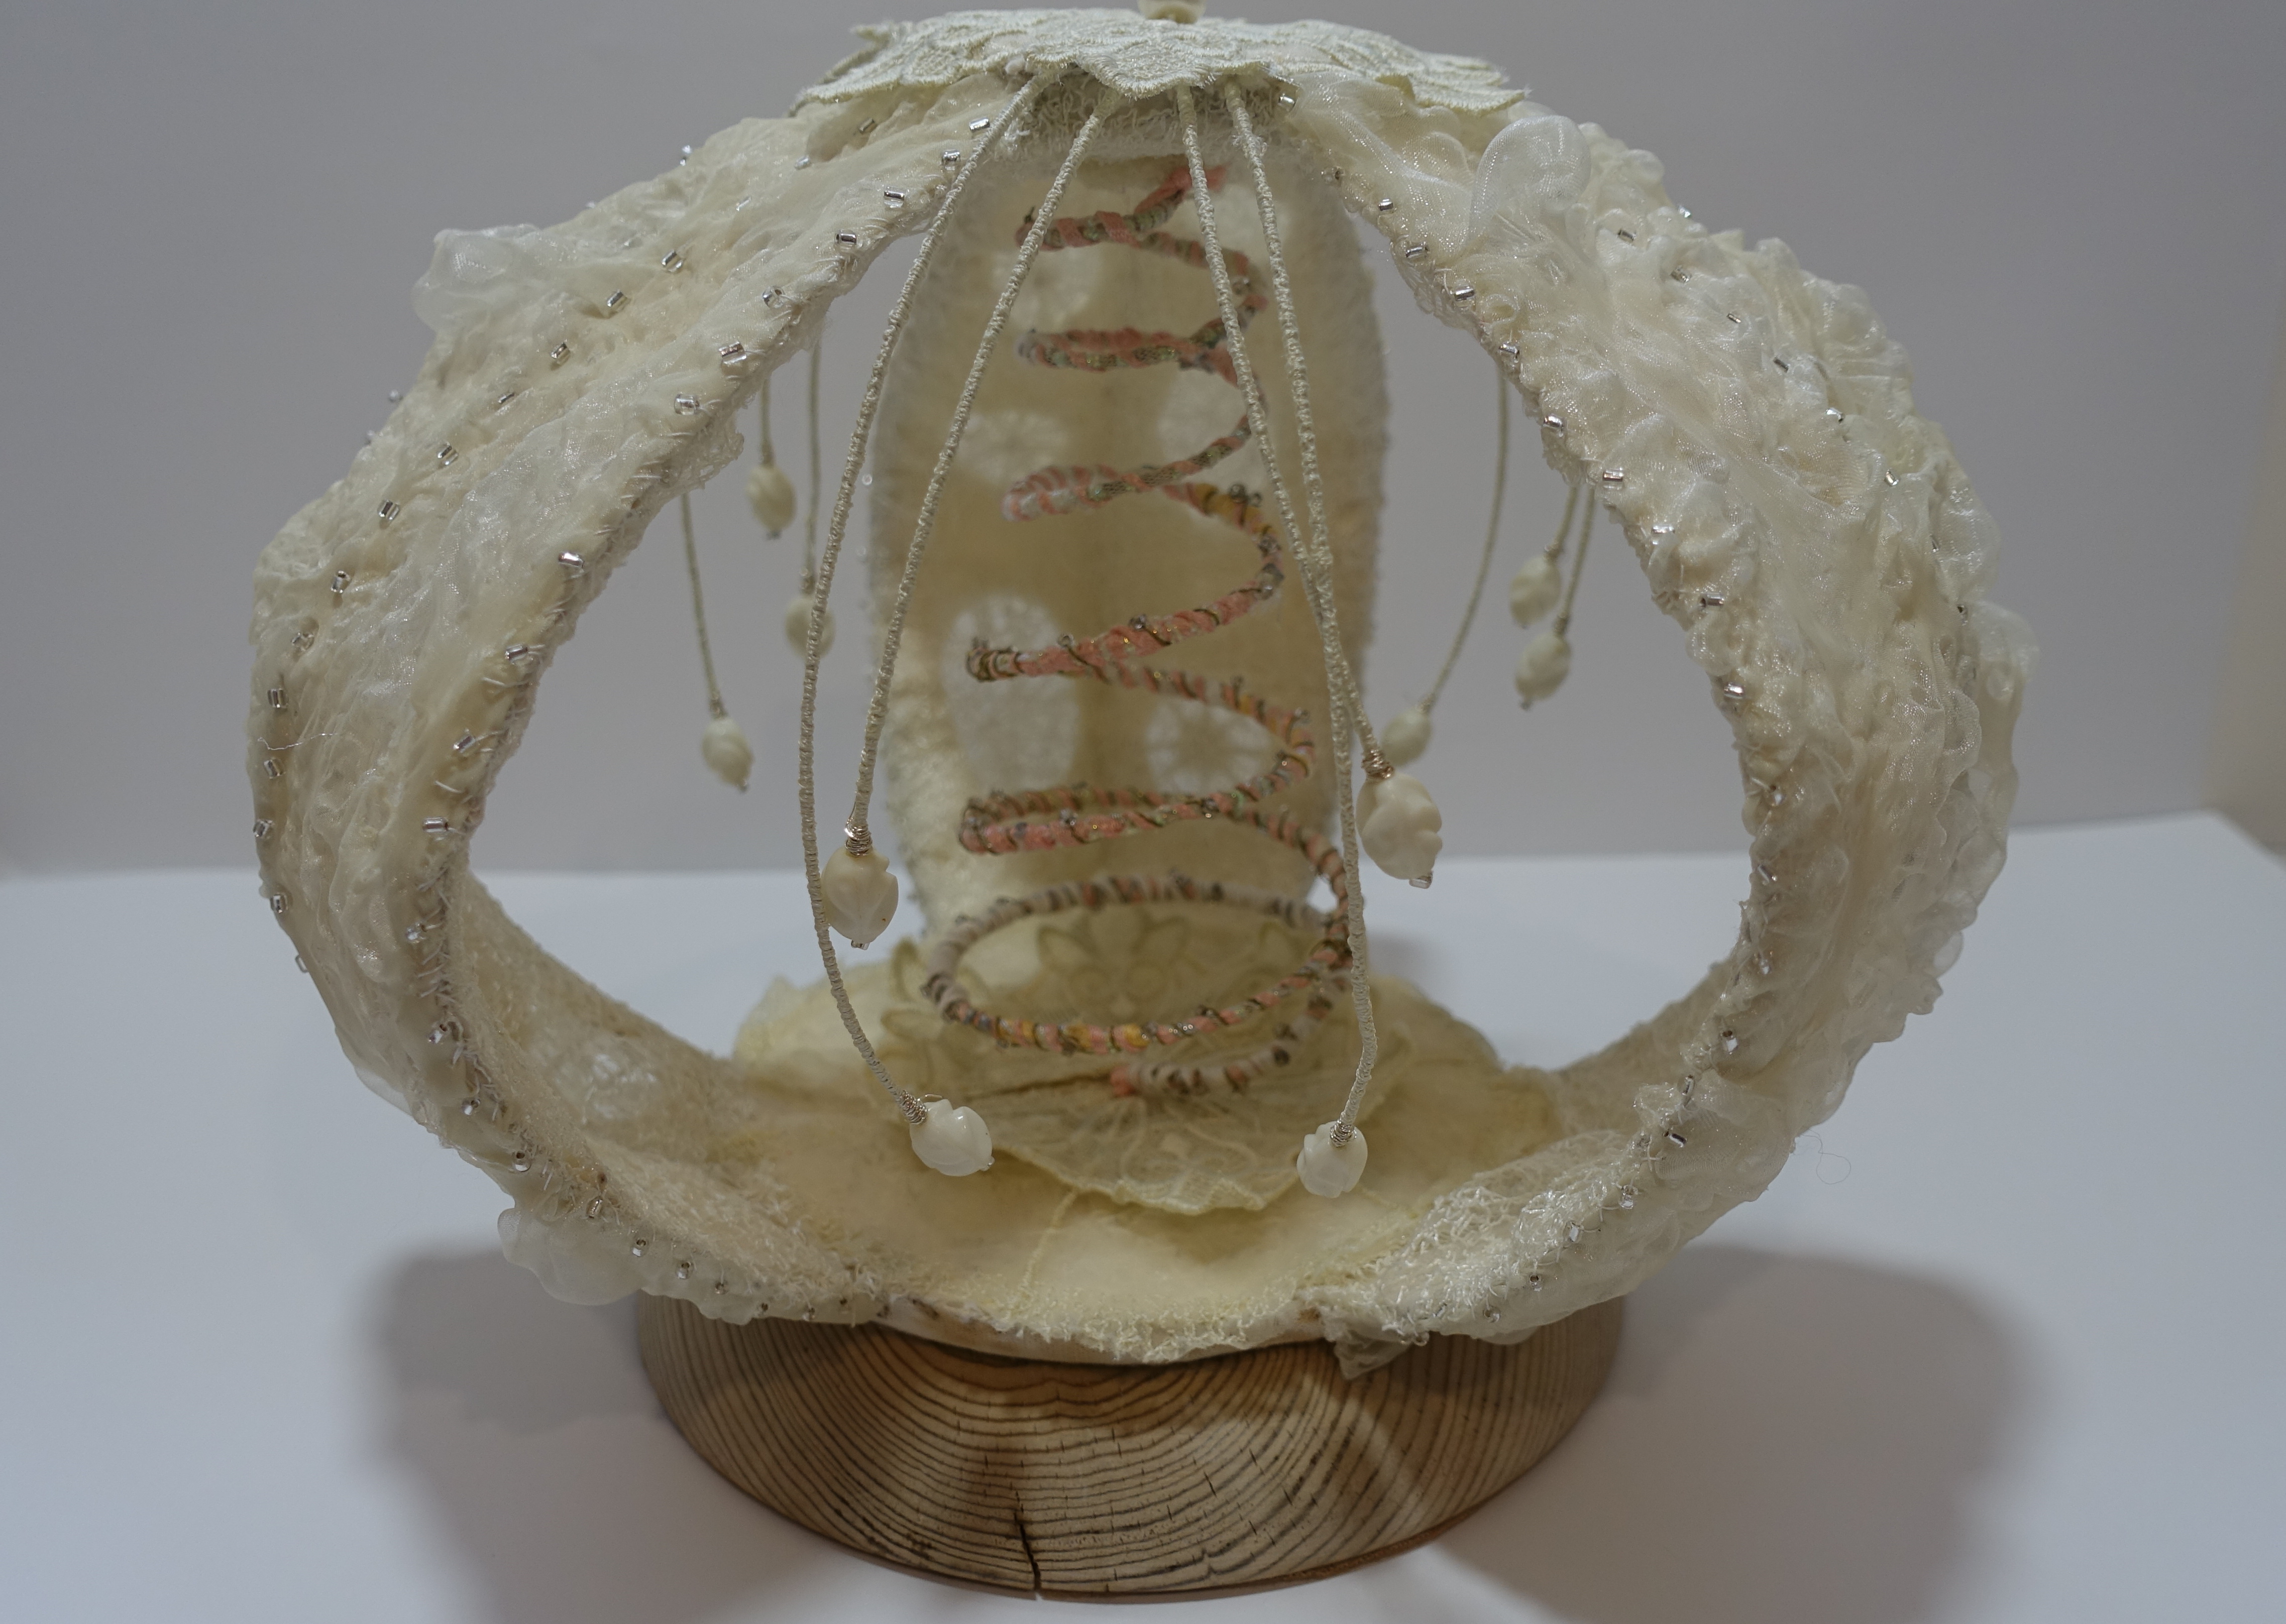 Title Oyster Shell
Price £80
Size 24 x 28 x 28cm
3D Sculpture